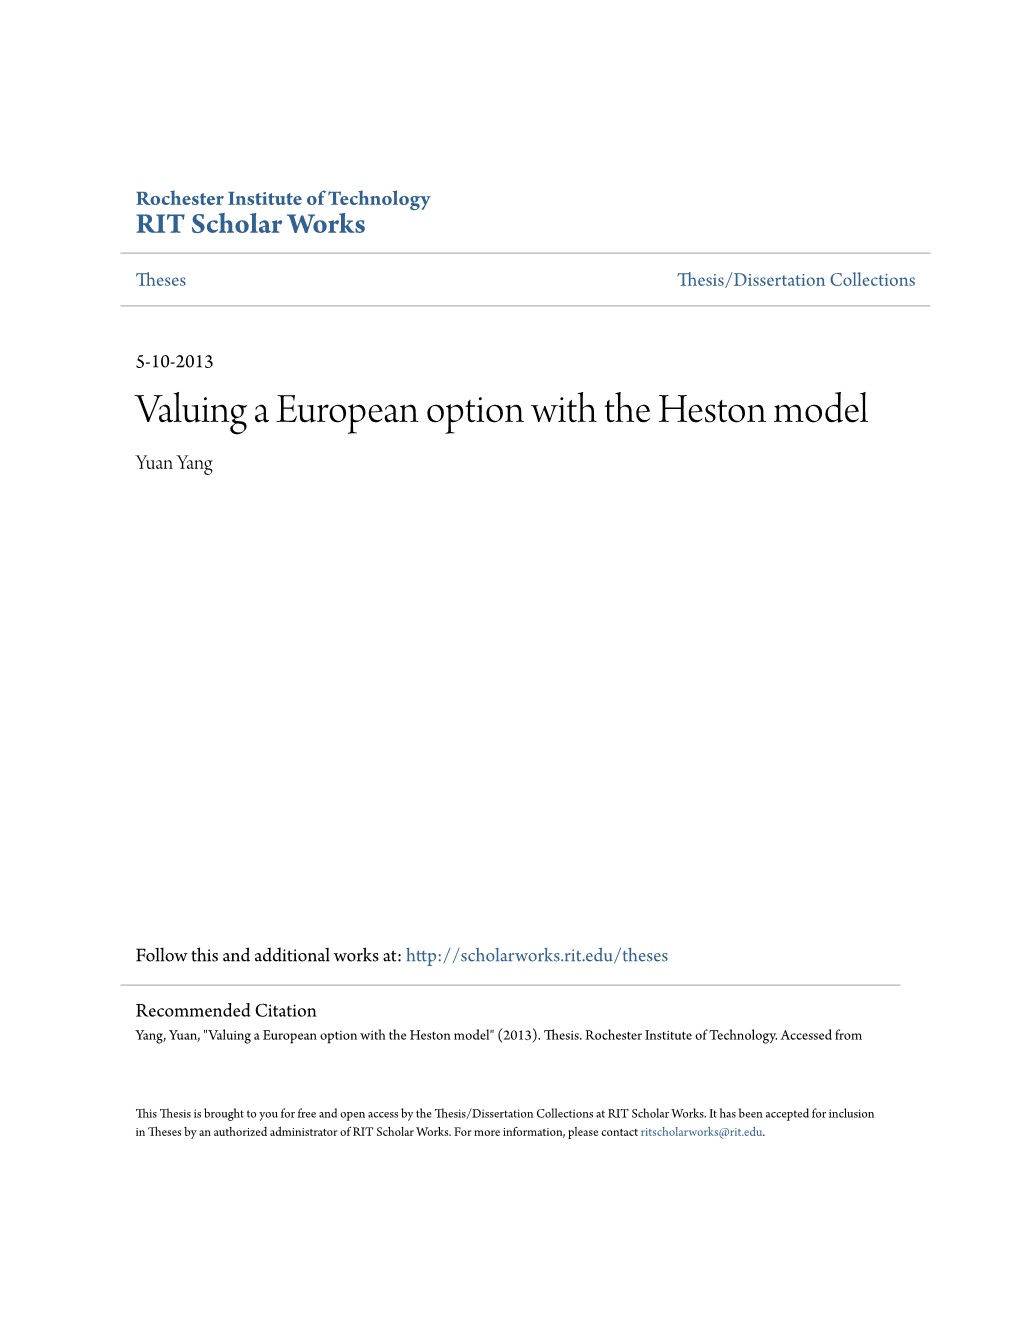 Valuing a European Option with the Heston Model Yuan Yang